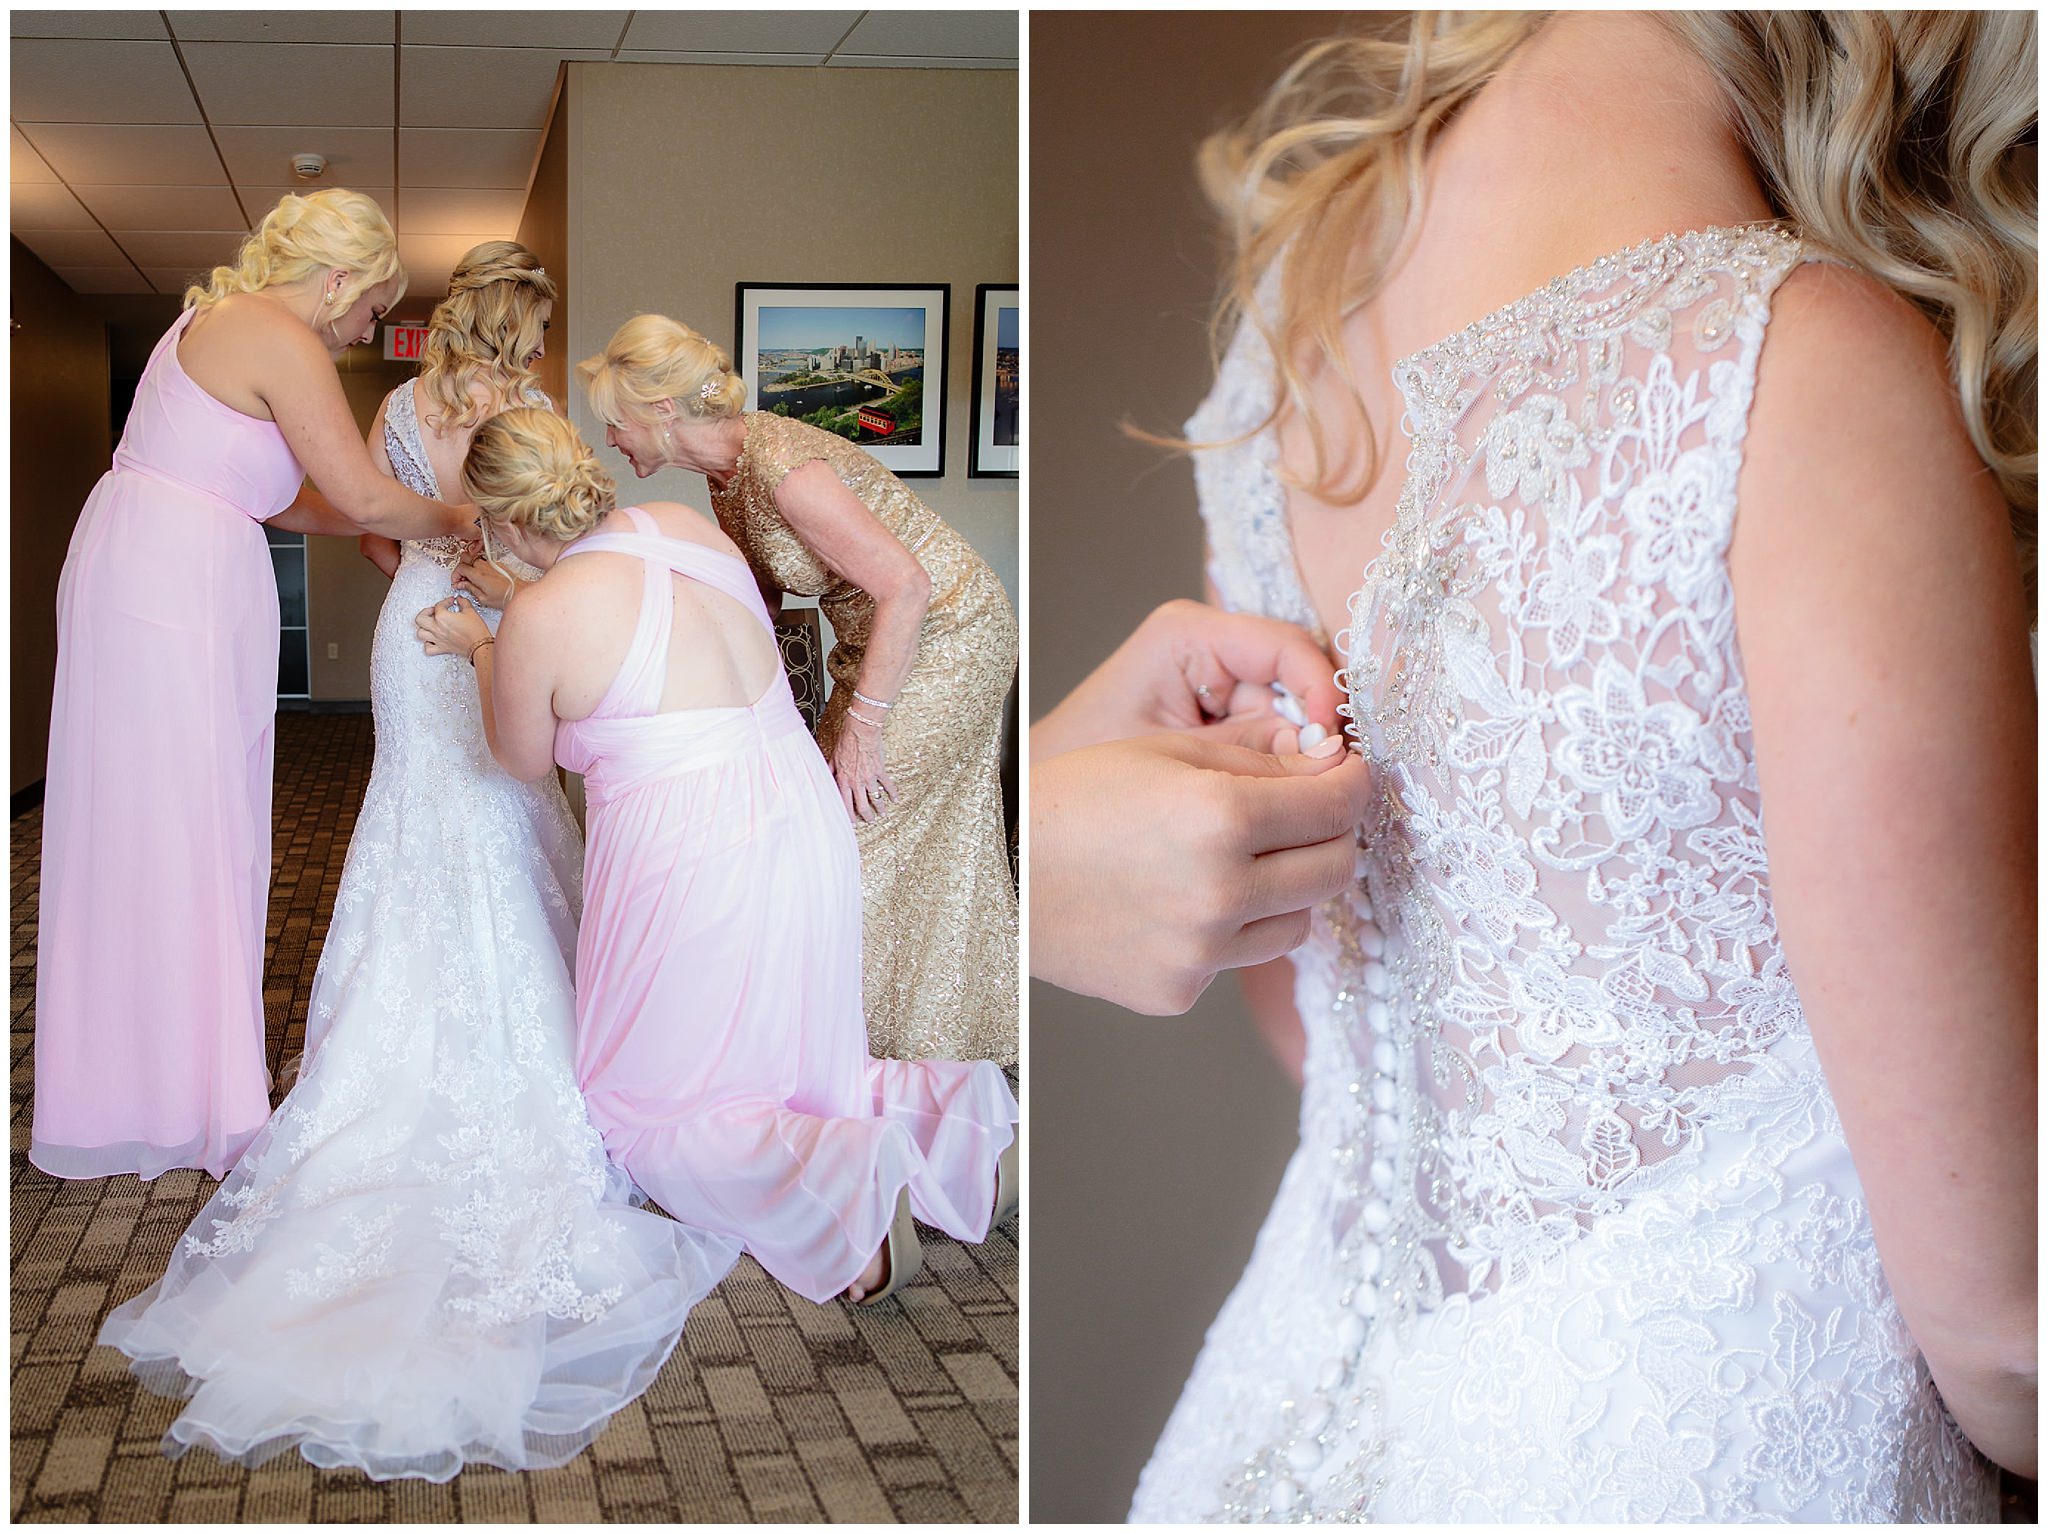 Bridesmaids help the bride into her dress before her Duquesne University wedding ceremony